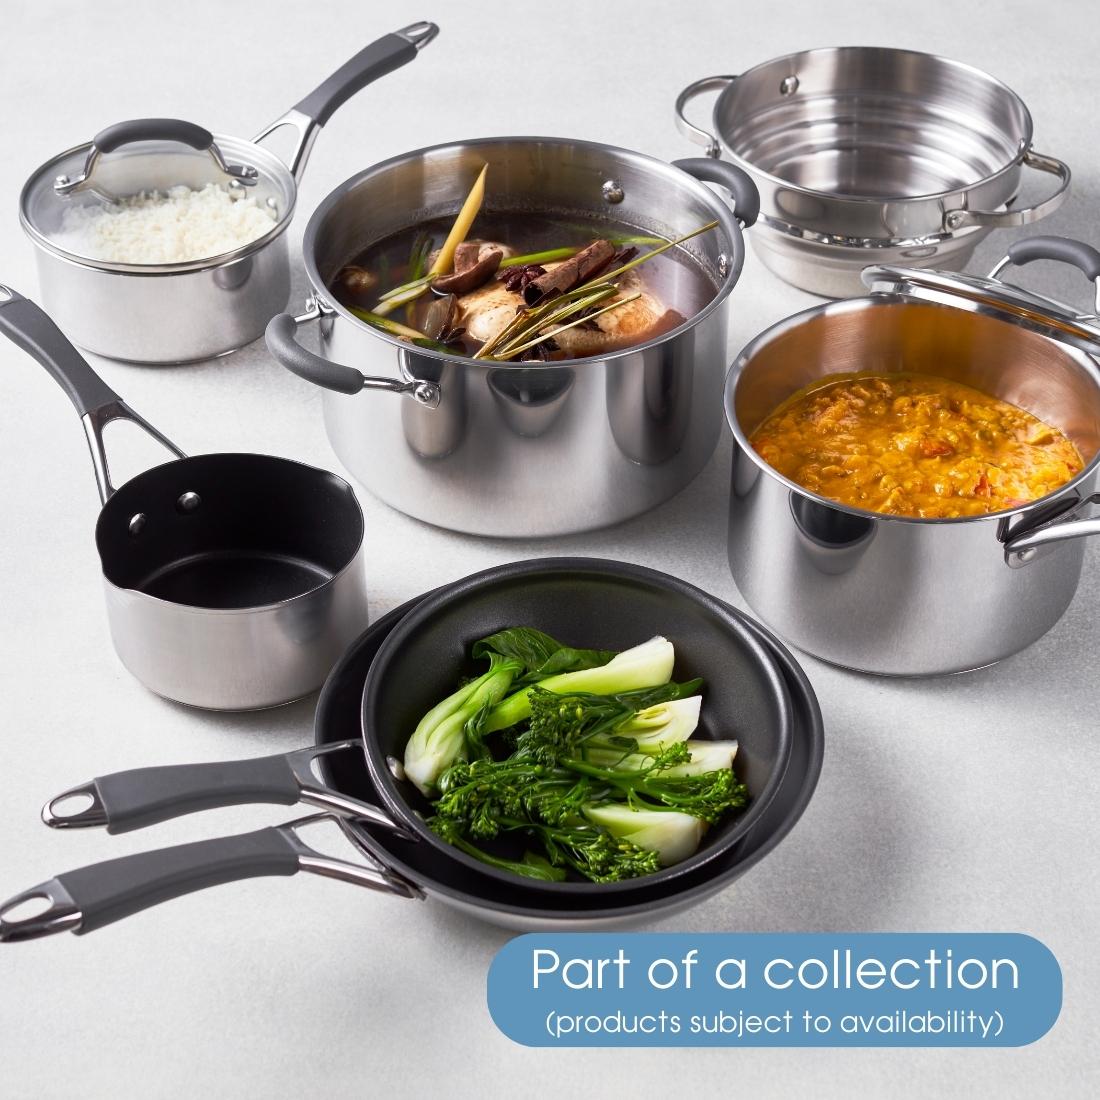 RACO Reliance Nonstick Induction 6 Piece Cookware Set Grey